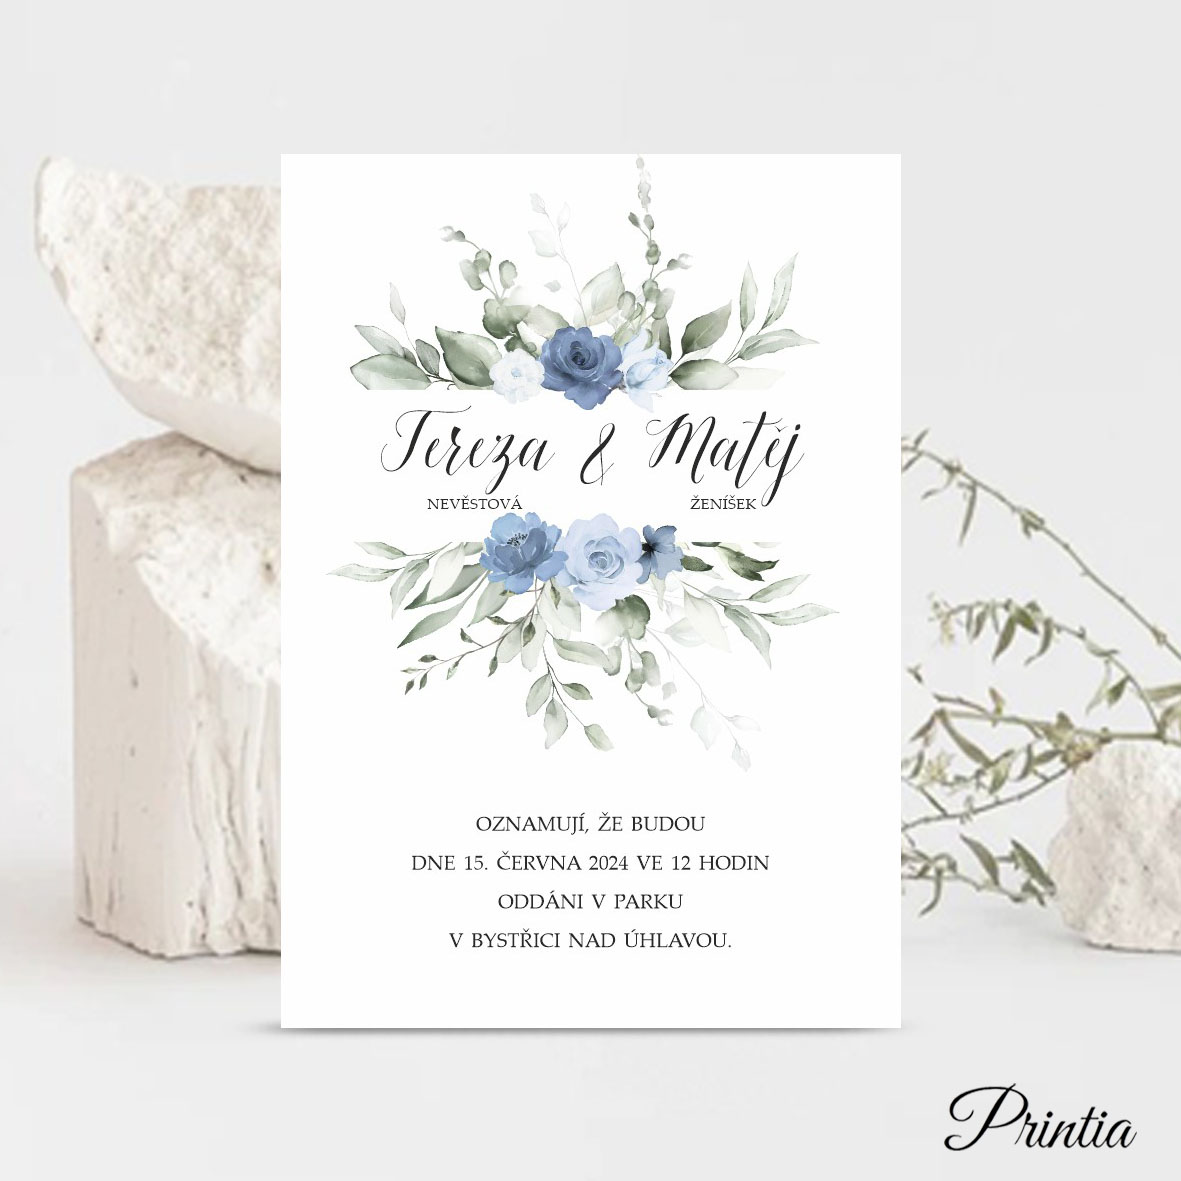 Wedding invitation with flowers in shades of blue